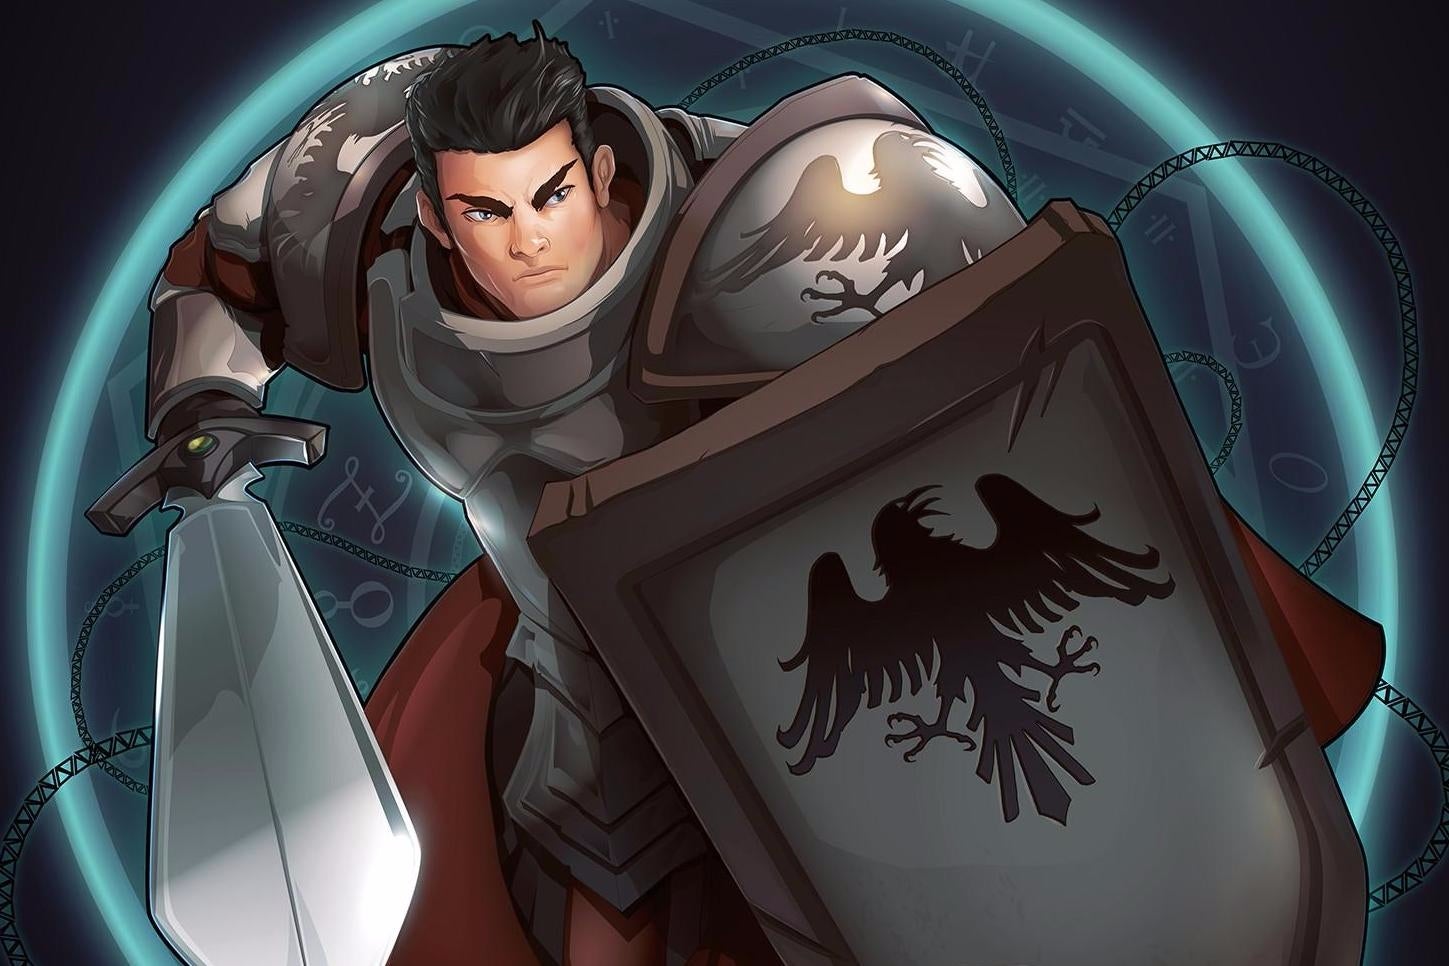 Image for MMO Crowfall returns to crowdfunding, spearheading Indiegogo's new company investment offering